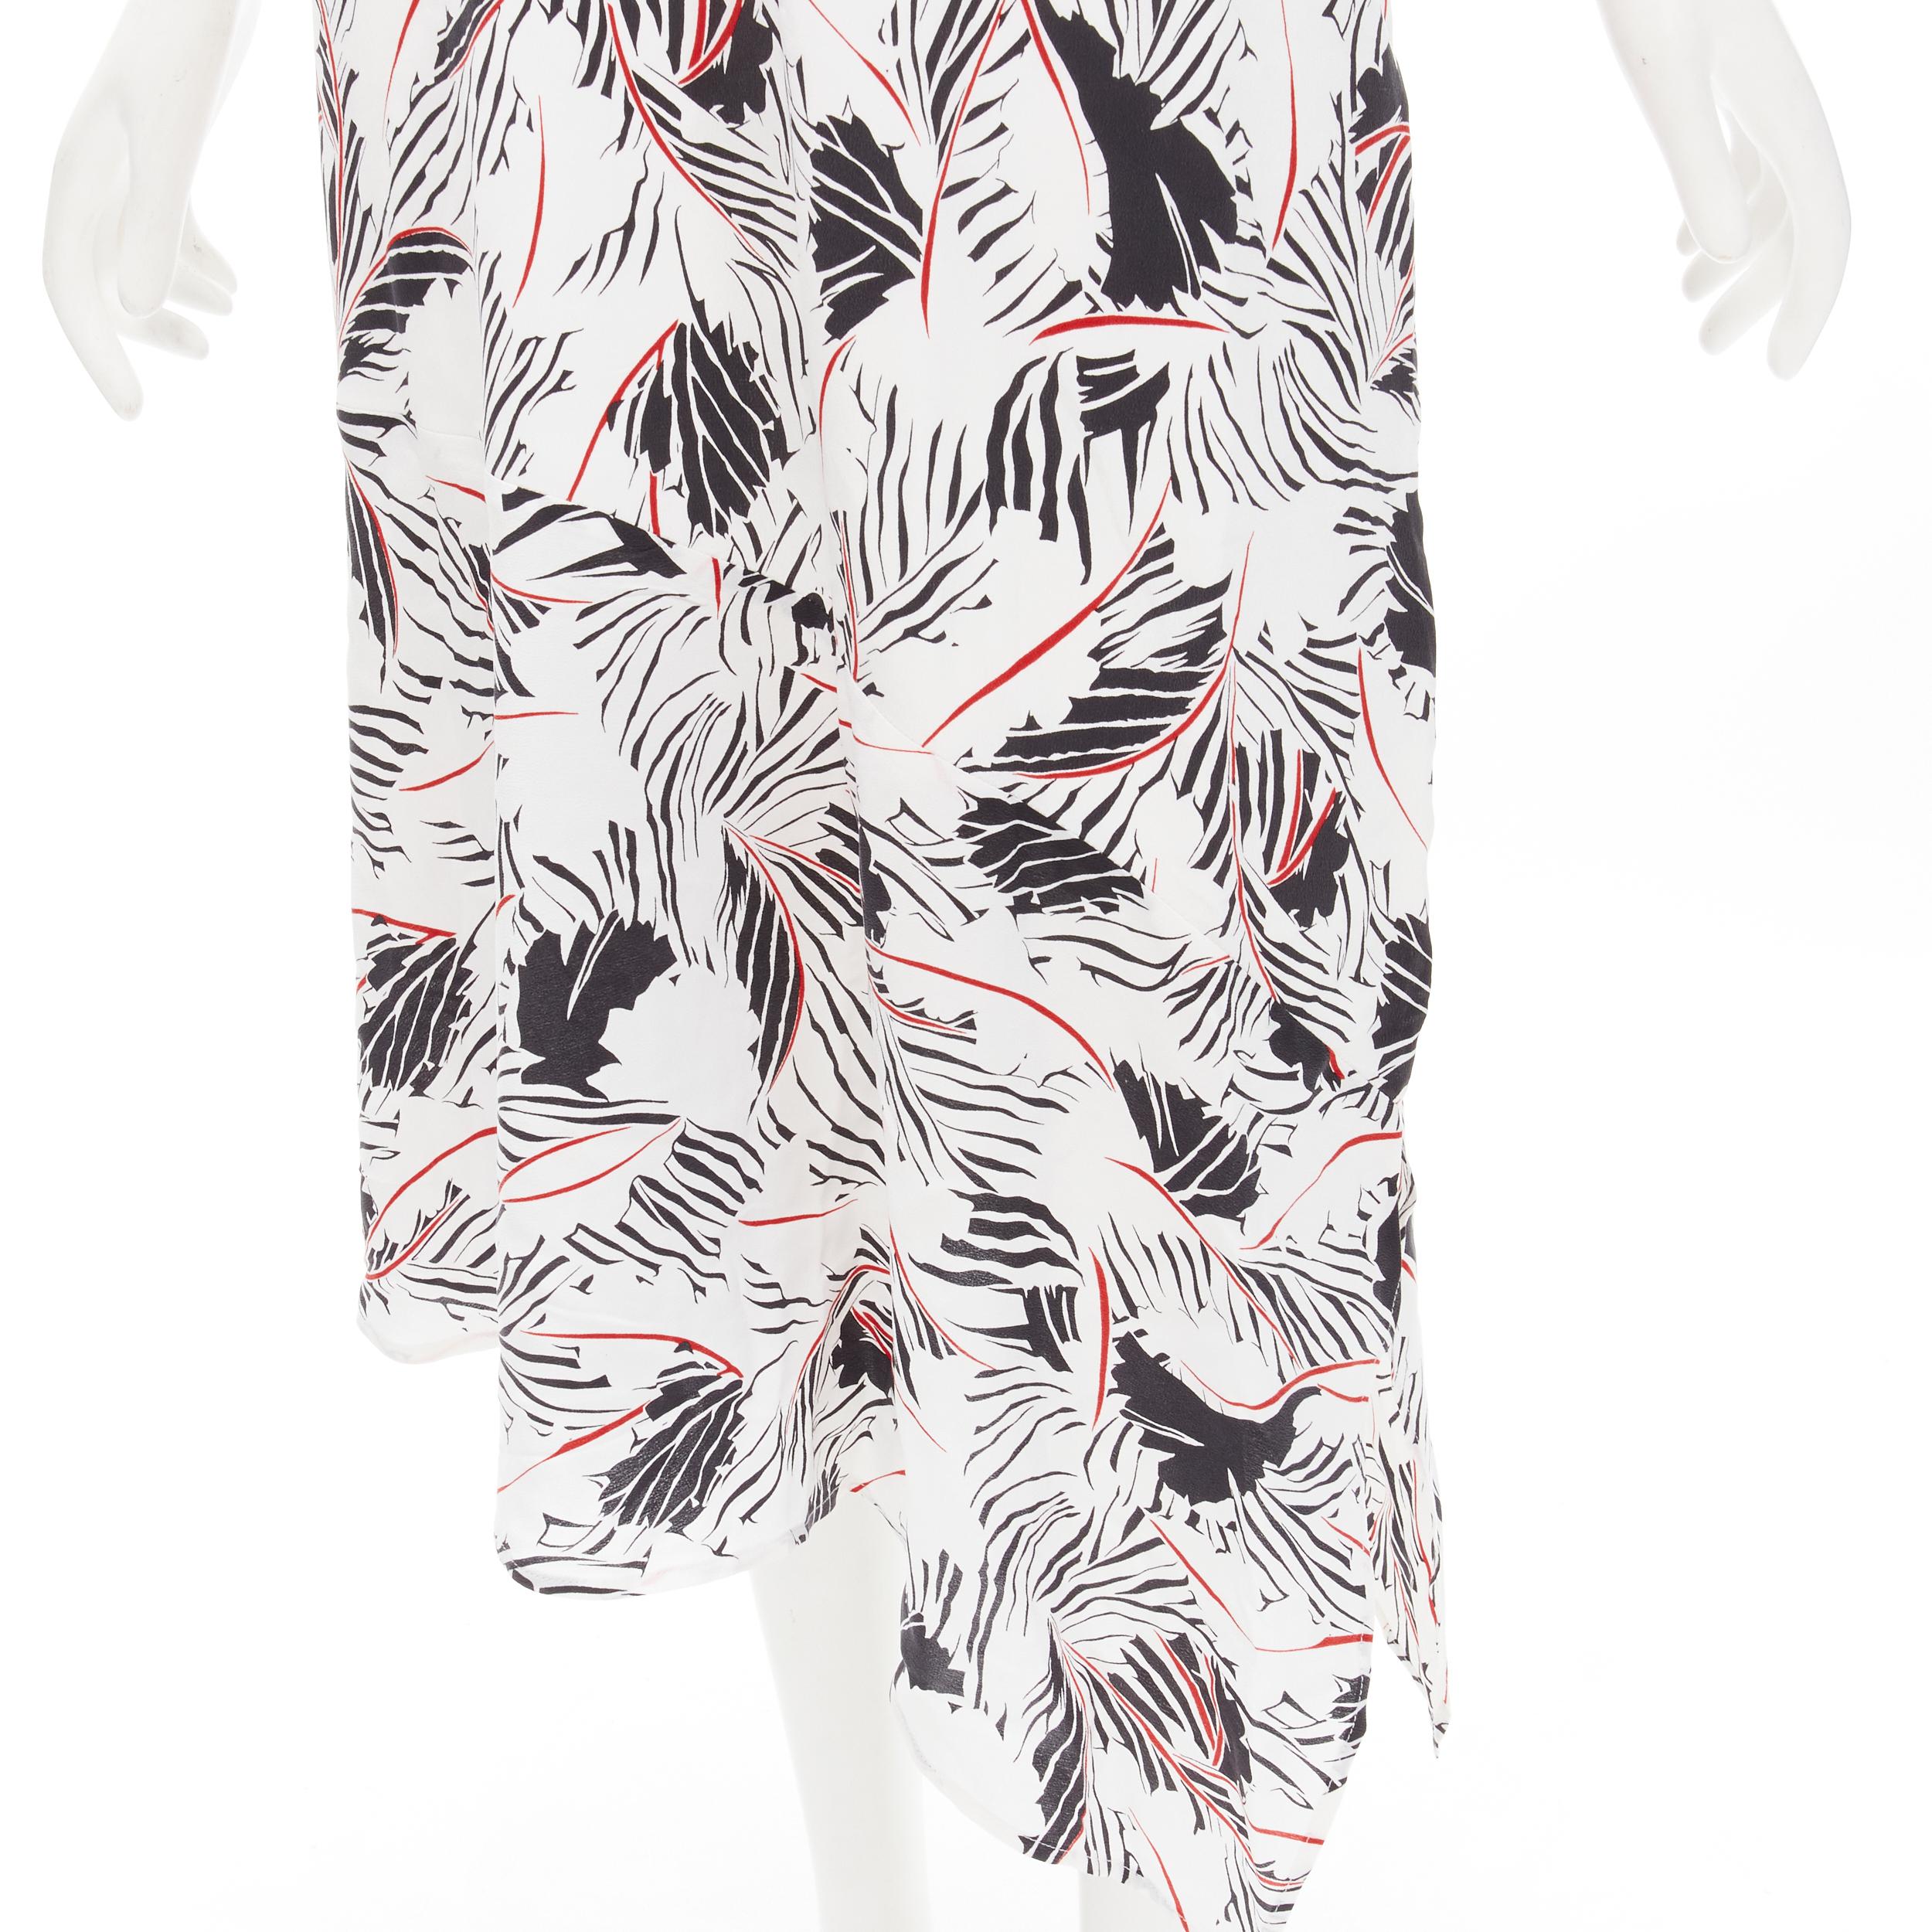 EQUIPMENT FEMME 100% silk white black red graphic print asymmetric slip dress S
Brand: Equipment Femme
Material: 100% Silk
Color: White
Pattern: Abstract
Made in: China

CONDITION:
Condition: Excellent, this item was pre-owned and is in excellent